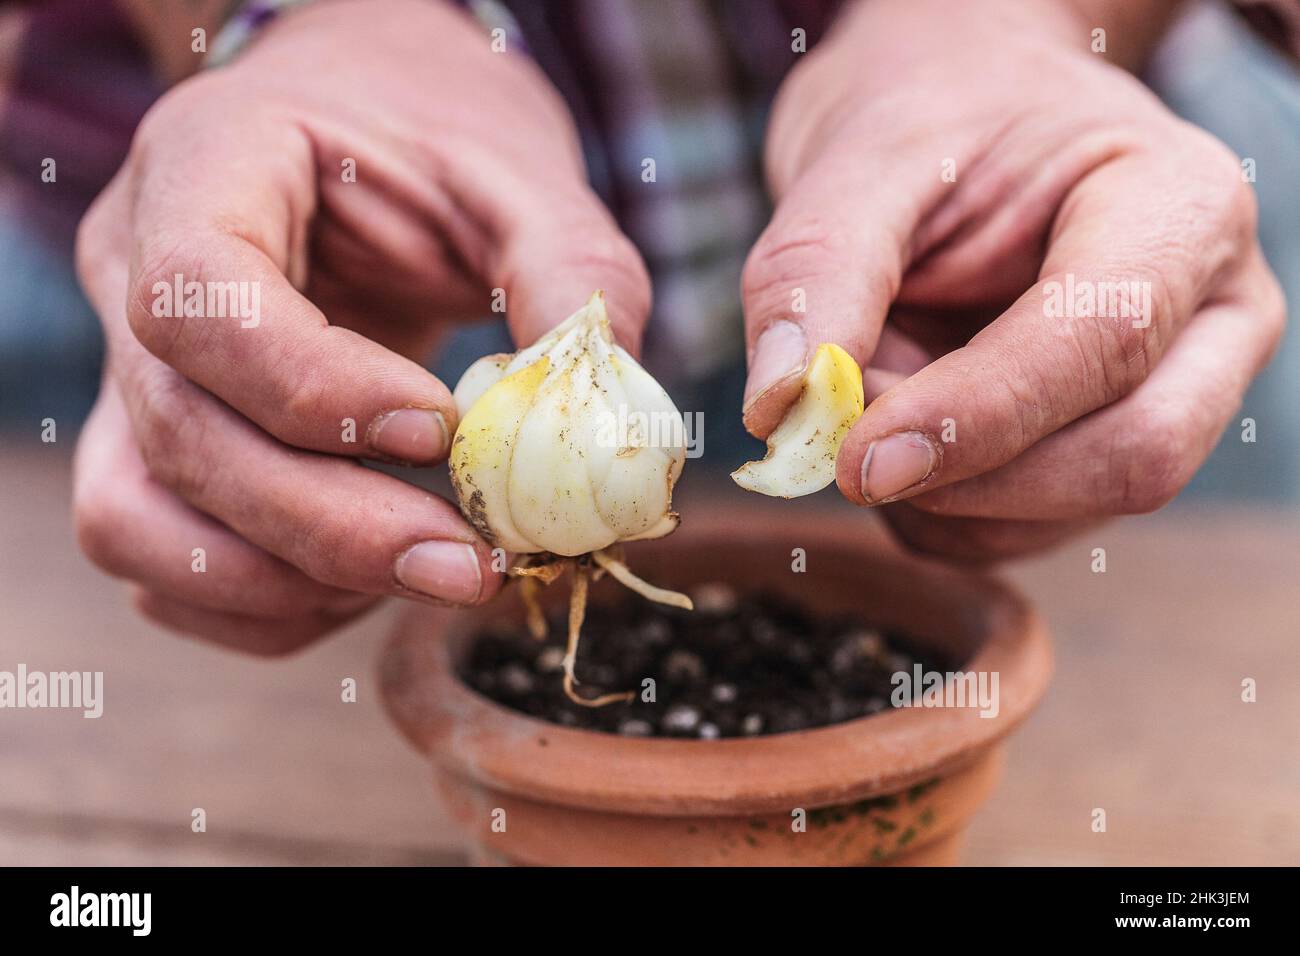 Cutting of a royal lily (Lilium regale) from scales taken from a bulb. Stock Photo